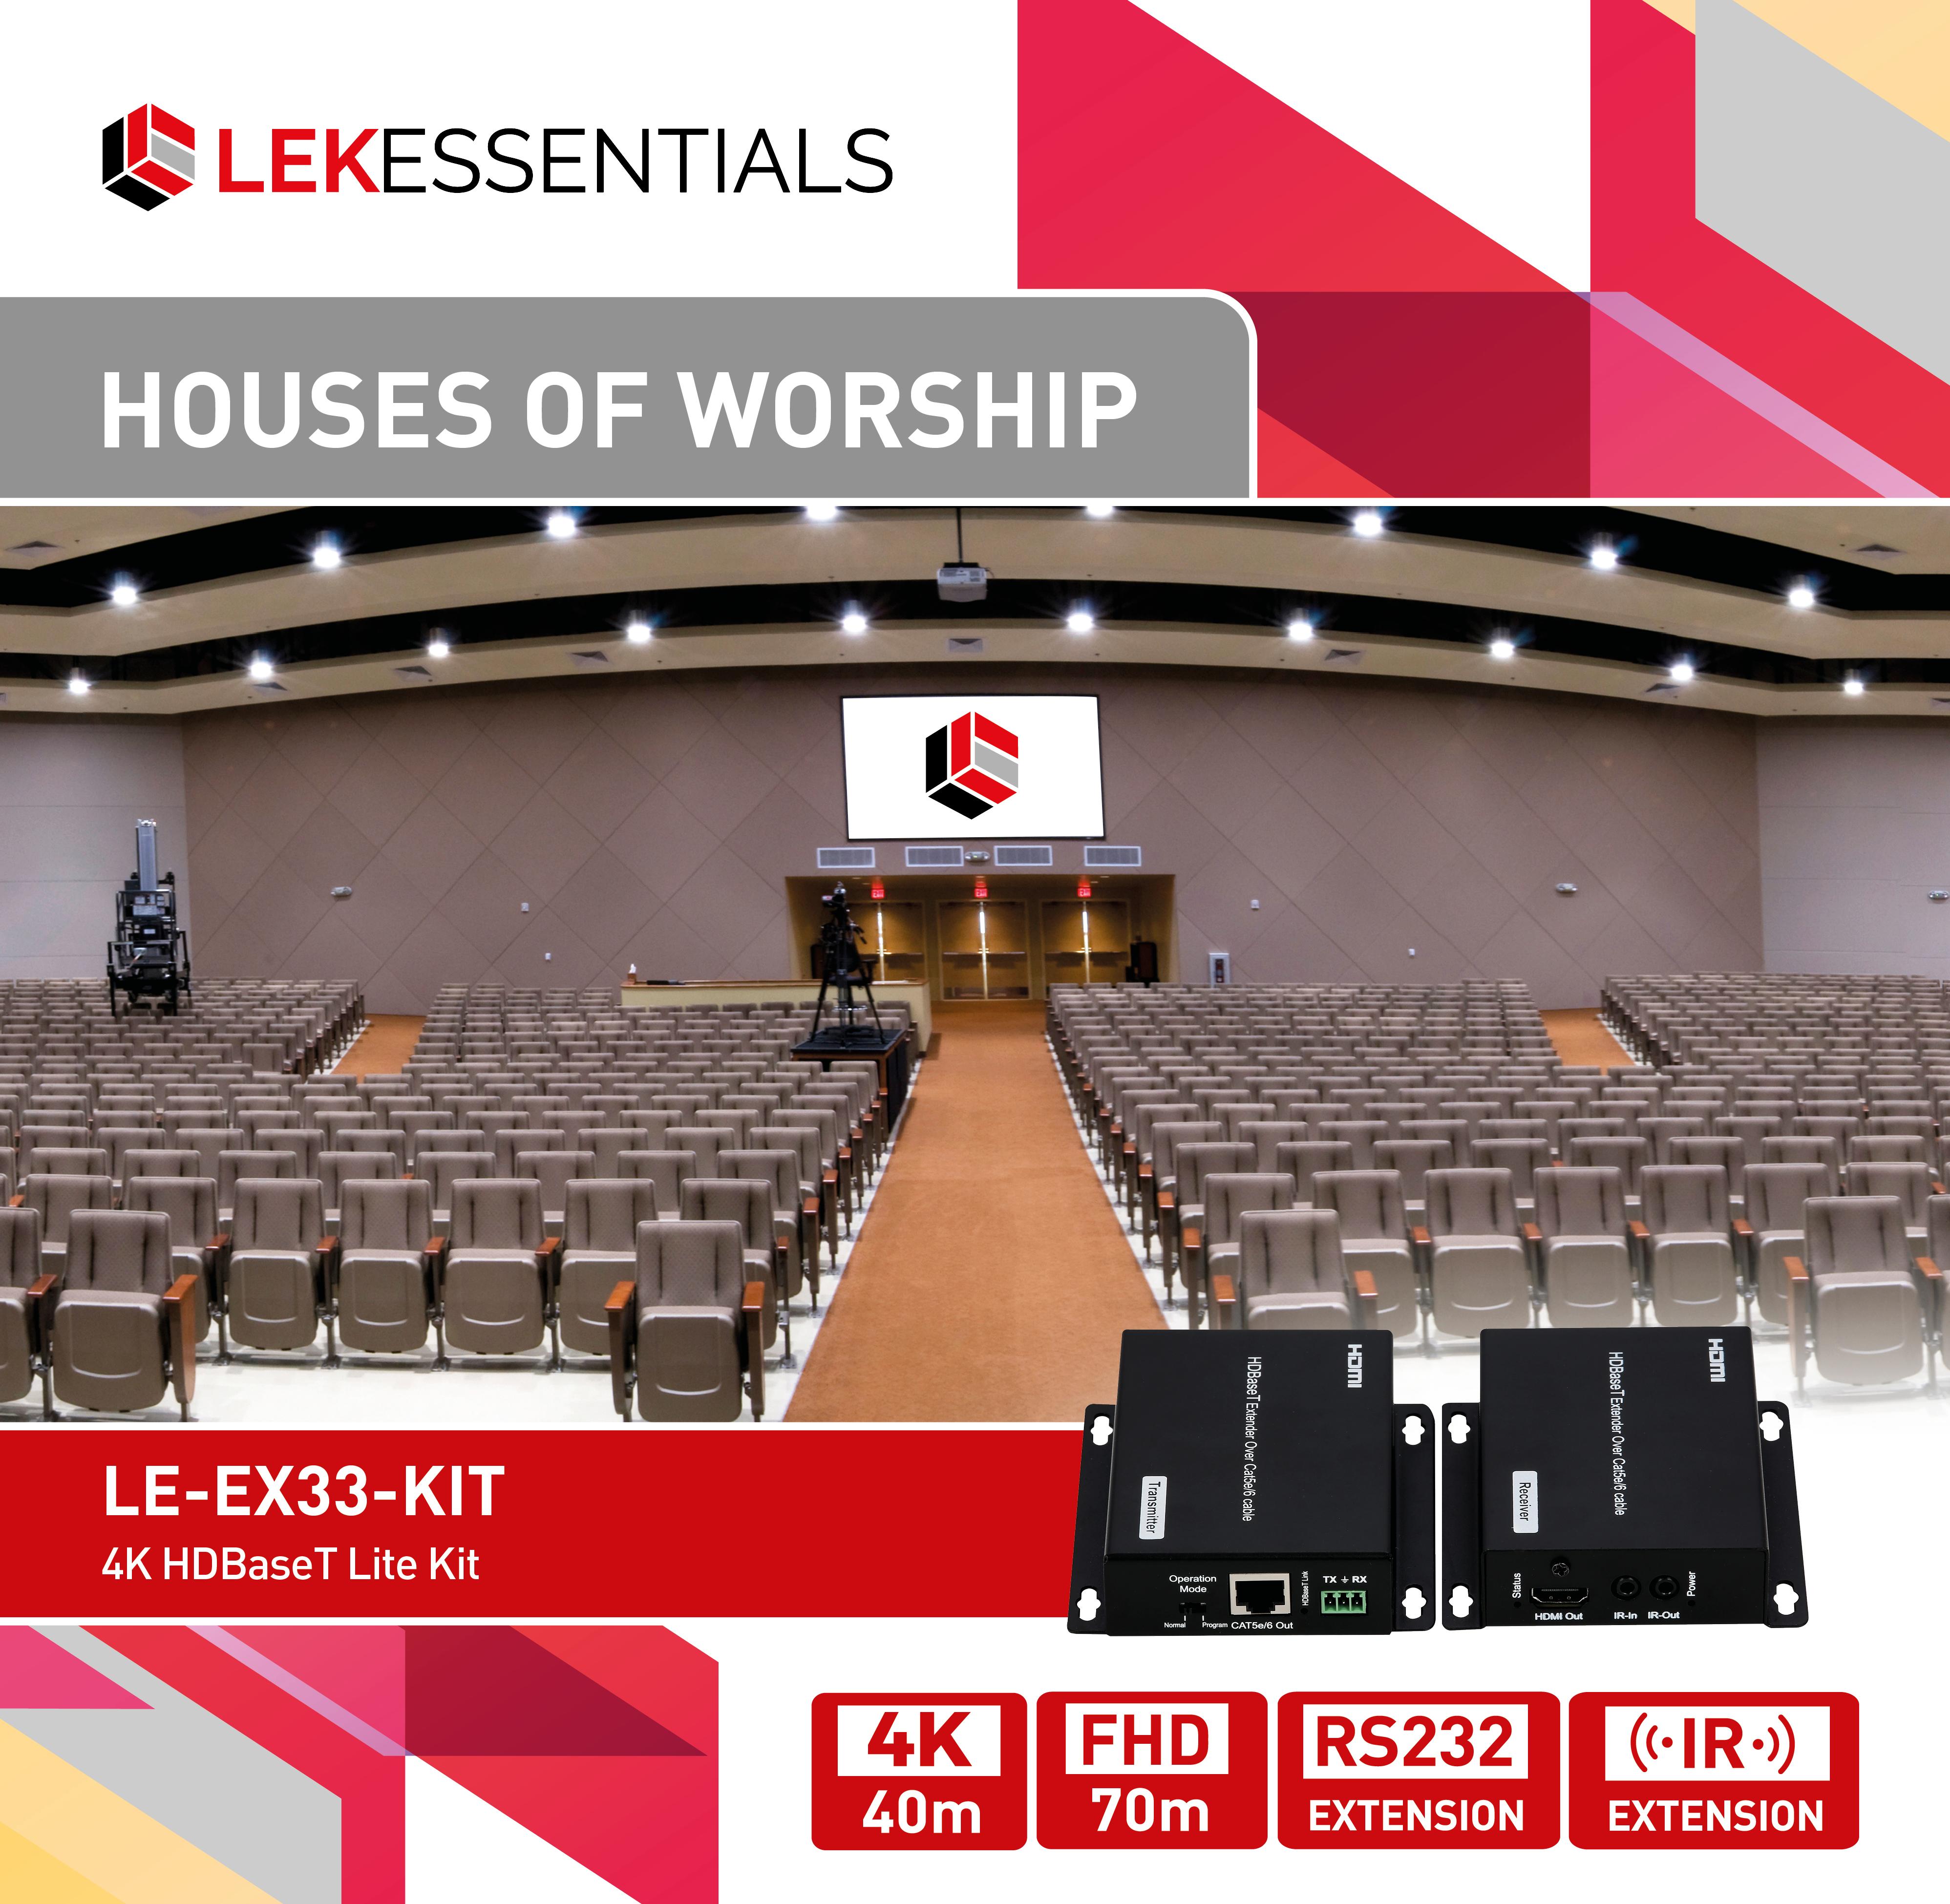 LE-EX33-KIT Houses of worship